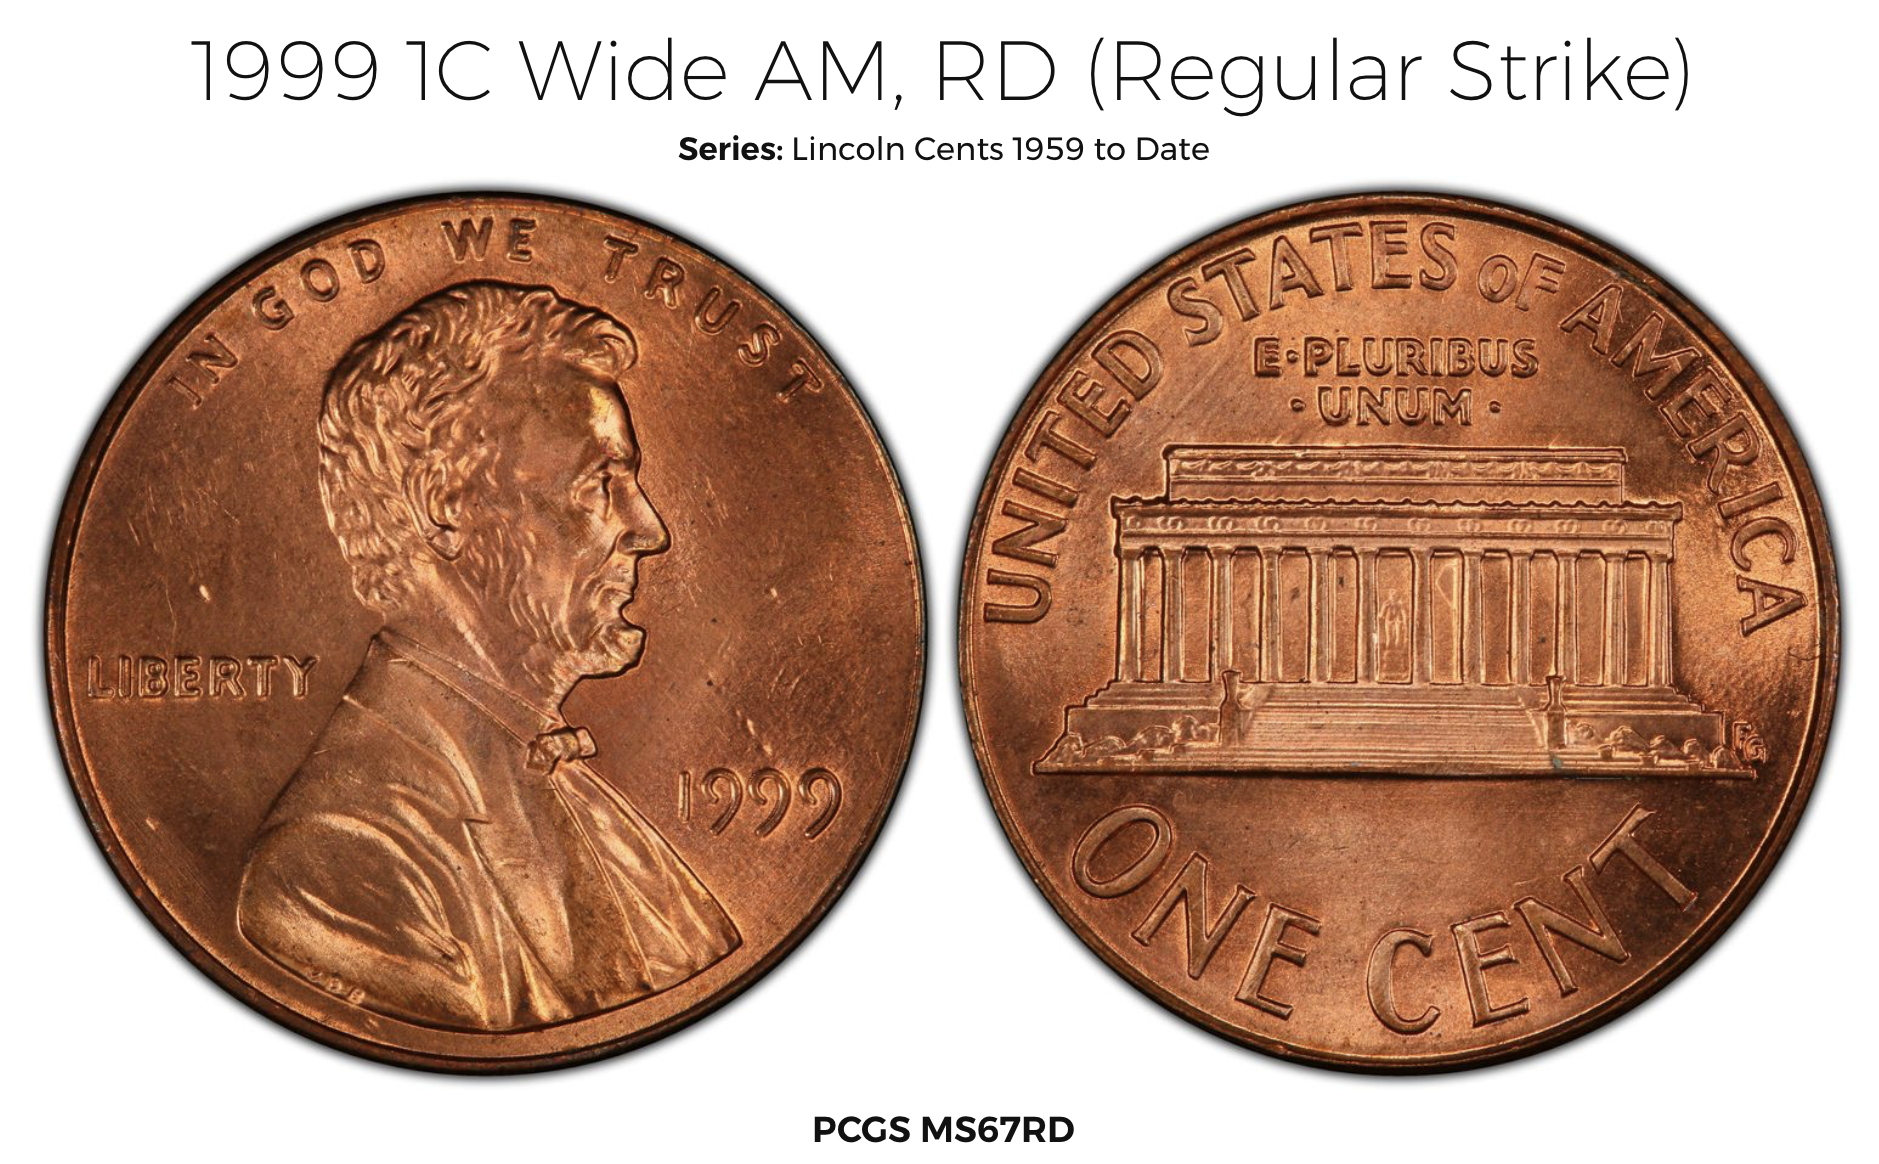 1999-P Wide AM Lincoln cent value